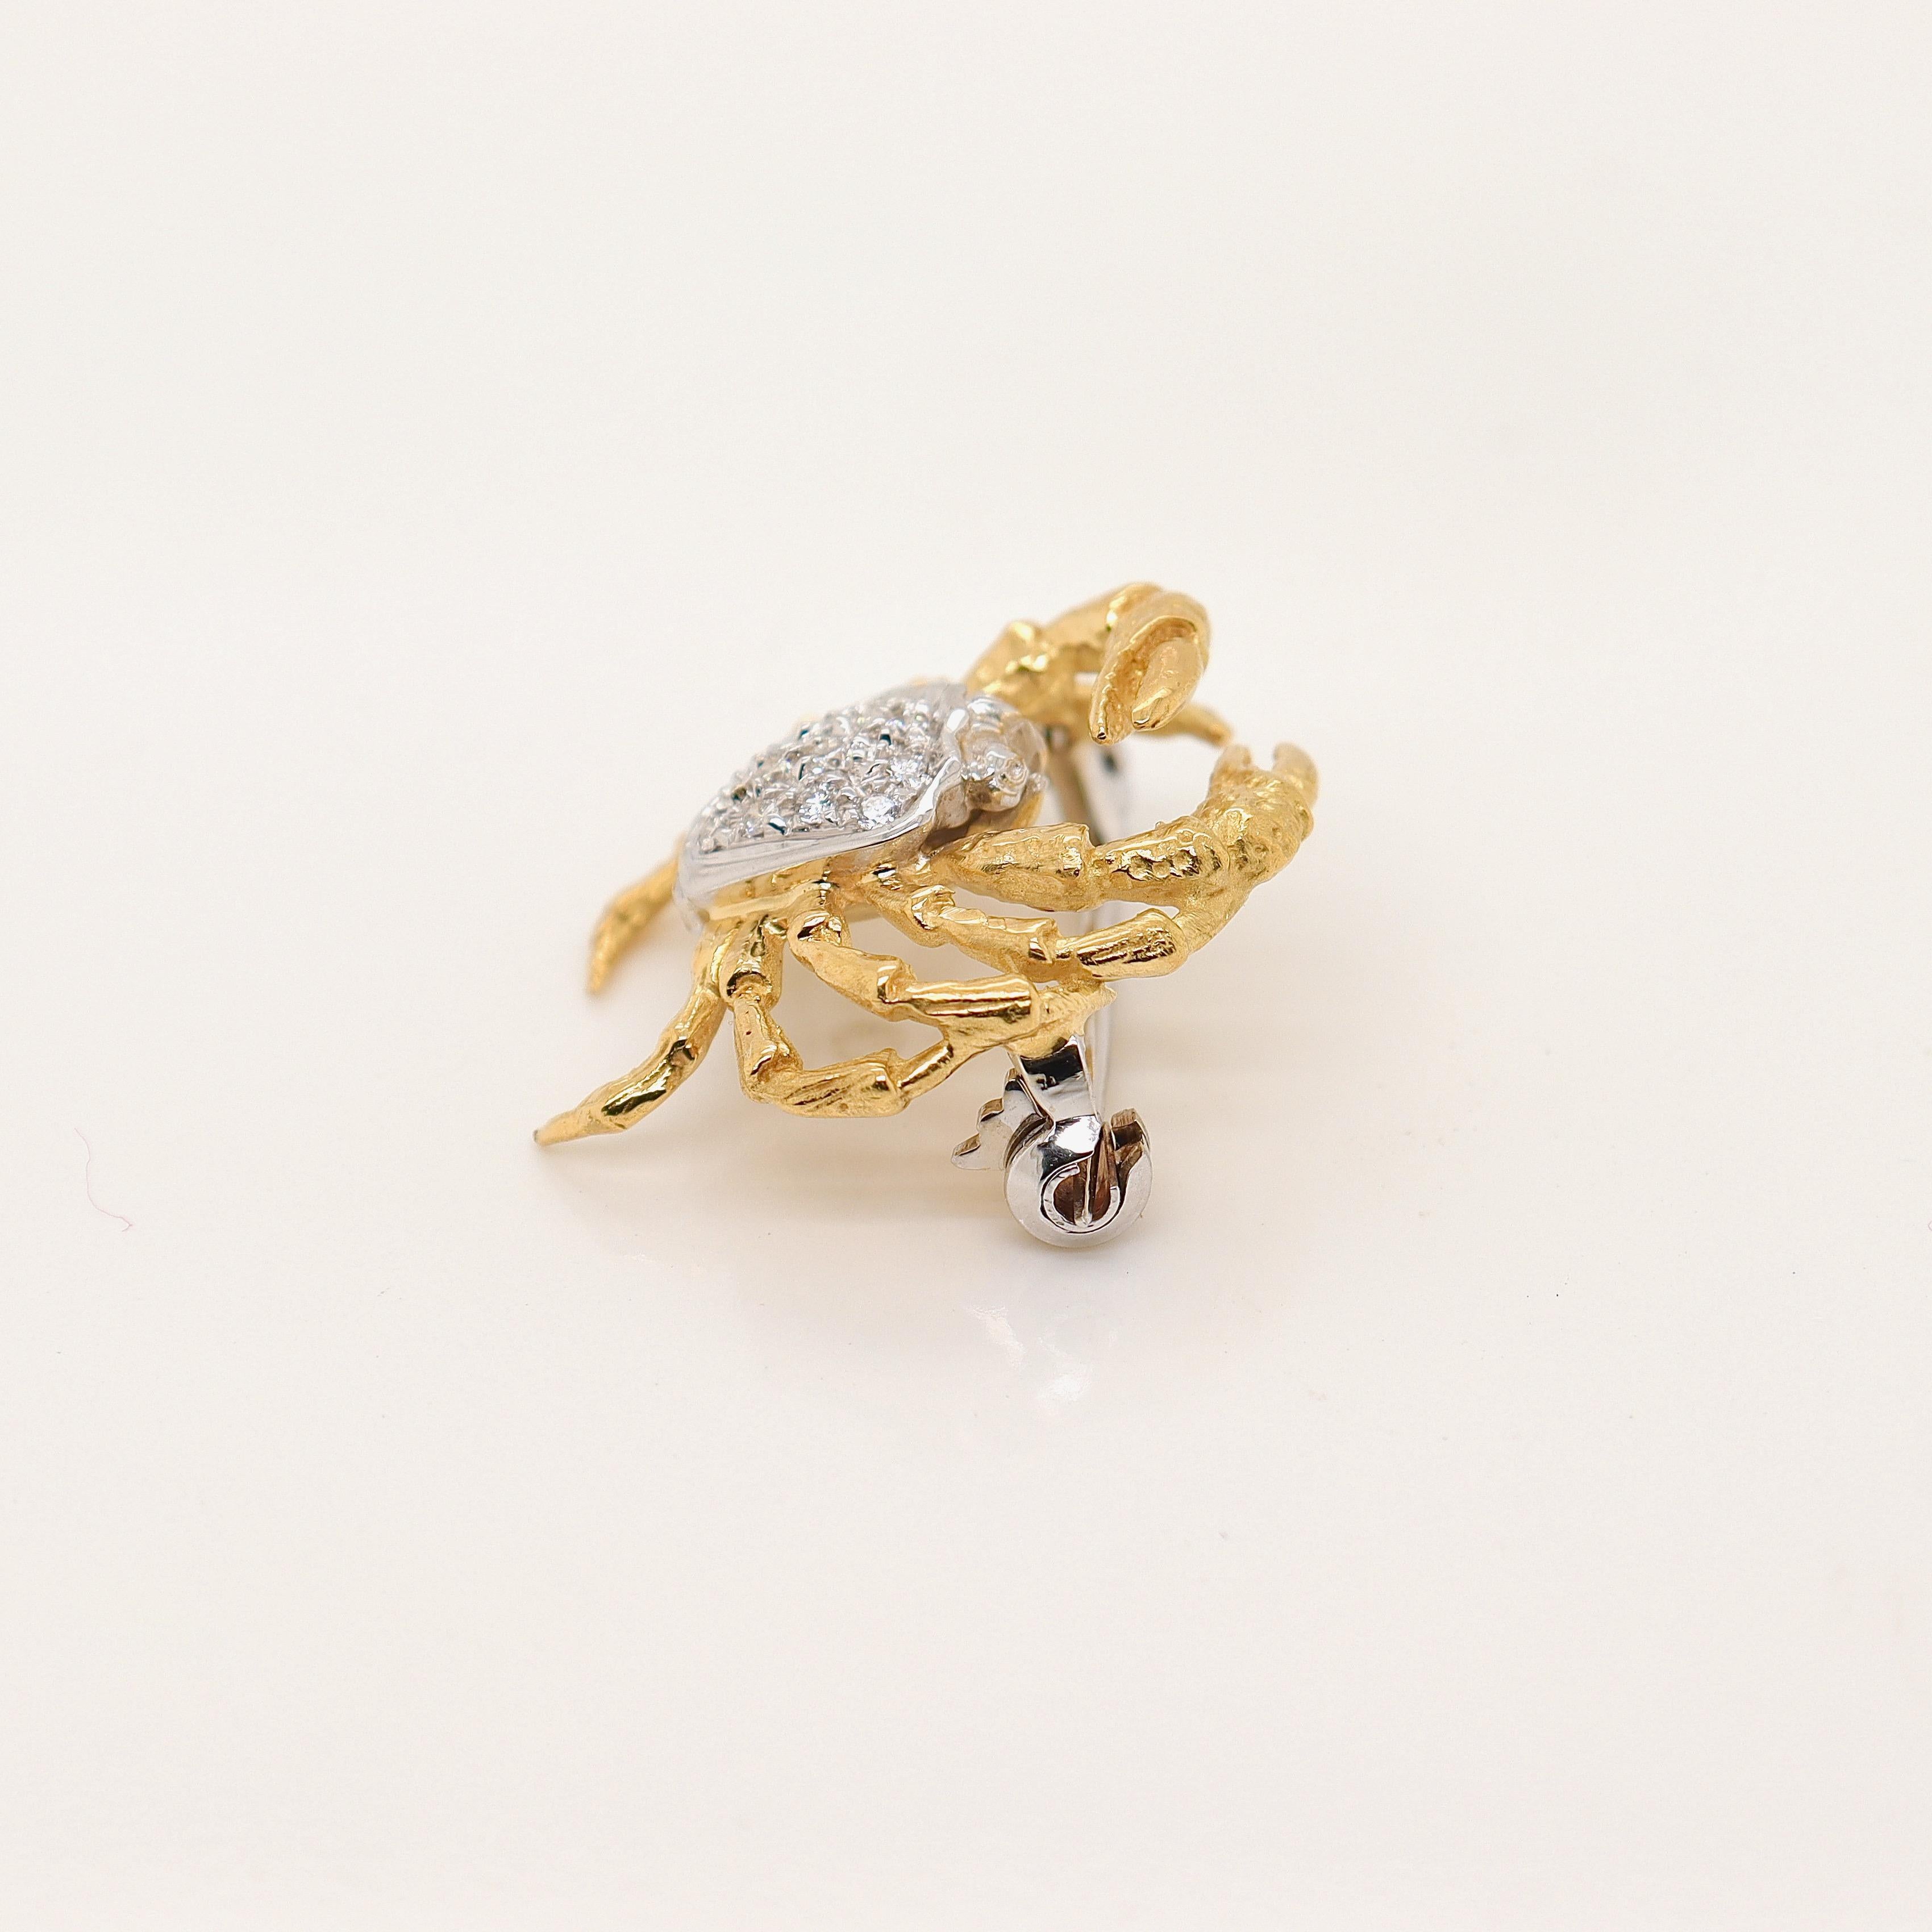 Signed Damiani 18k Gold & Diamond Crab Shaped Brooch or Pin  For Sale 4